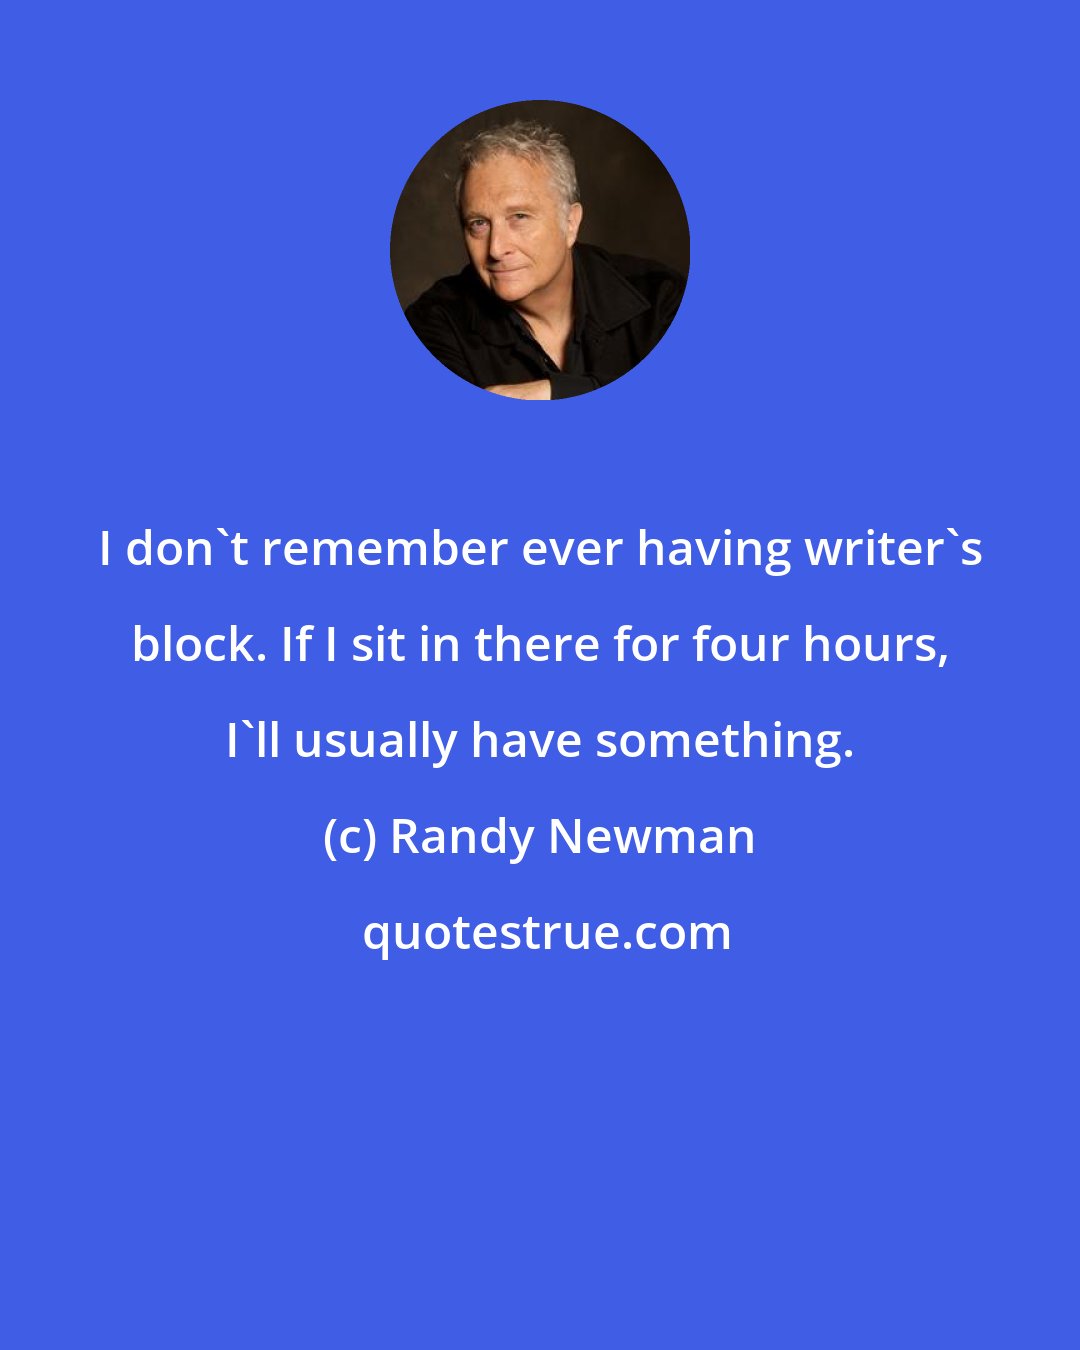 Randy Newman: I don't remember ever having writer's block. If I sit in there for four hours, I'll usually have something.